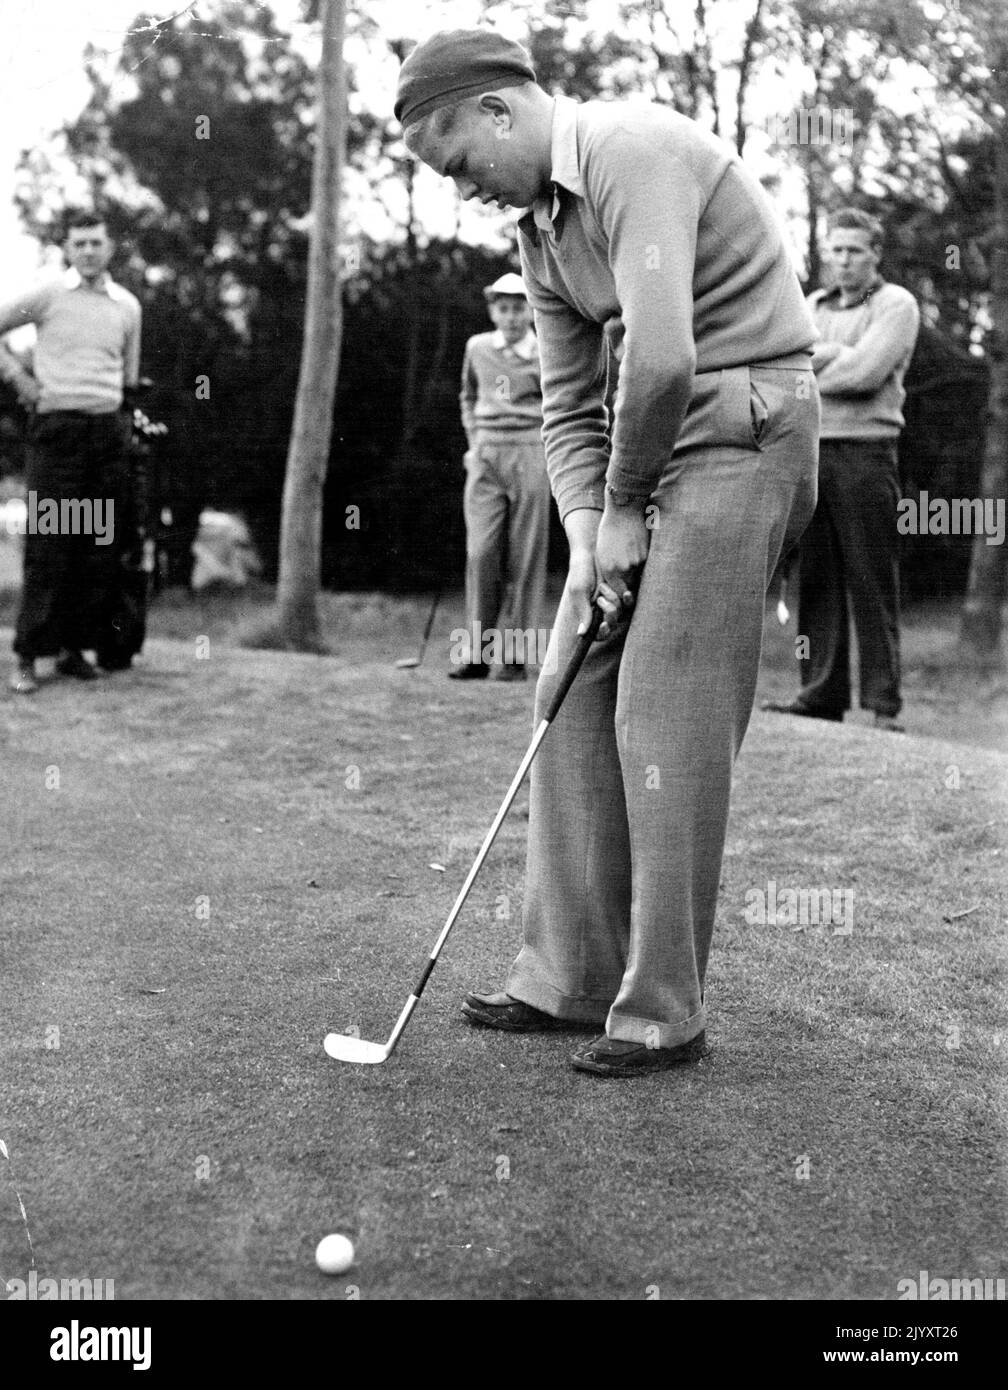 Frank Phillips - Golf - Personality. August 22, 1950. Stock Photo